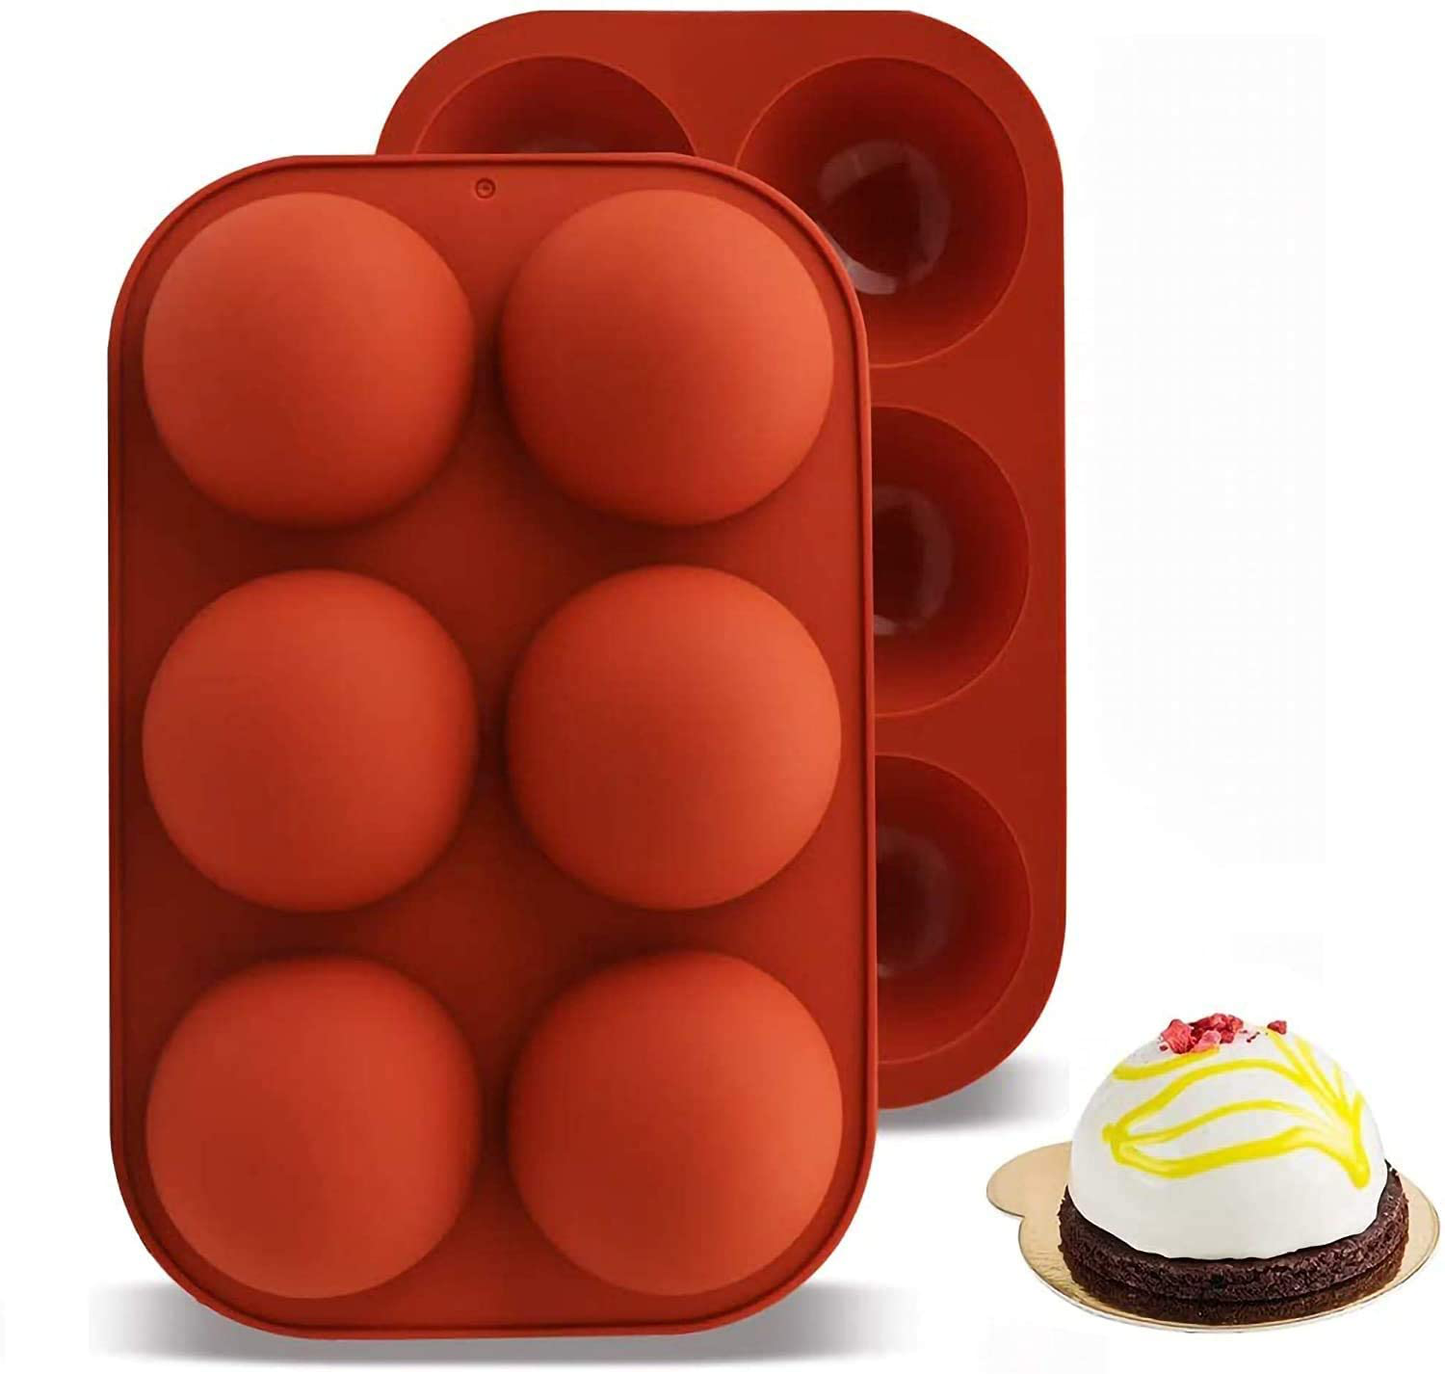 Silicone Baking Molds, 2 Packs Half Sphere Silicone chocolate Molds for Making Cake, Jelly, Dome Mousse, Brownie Cake